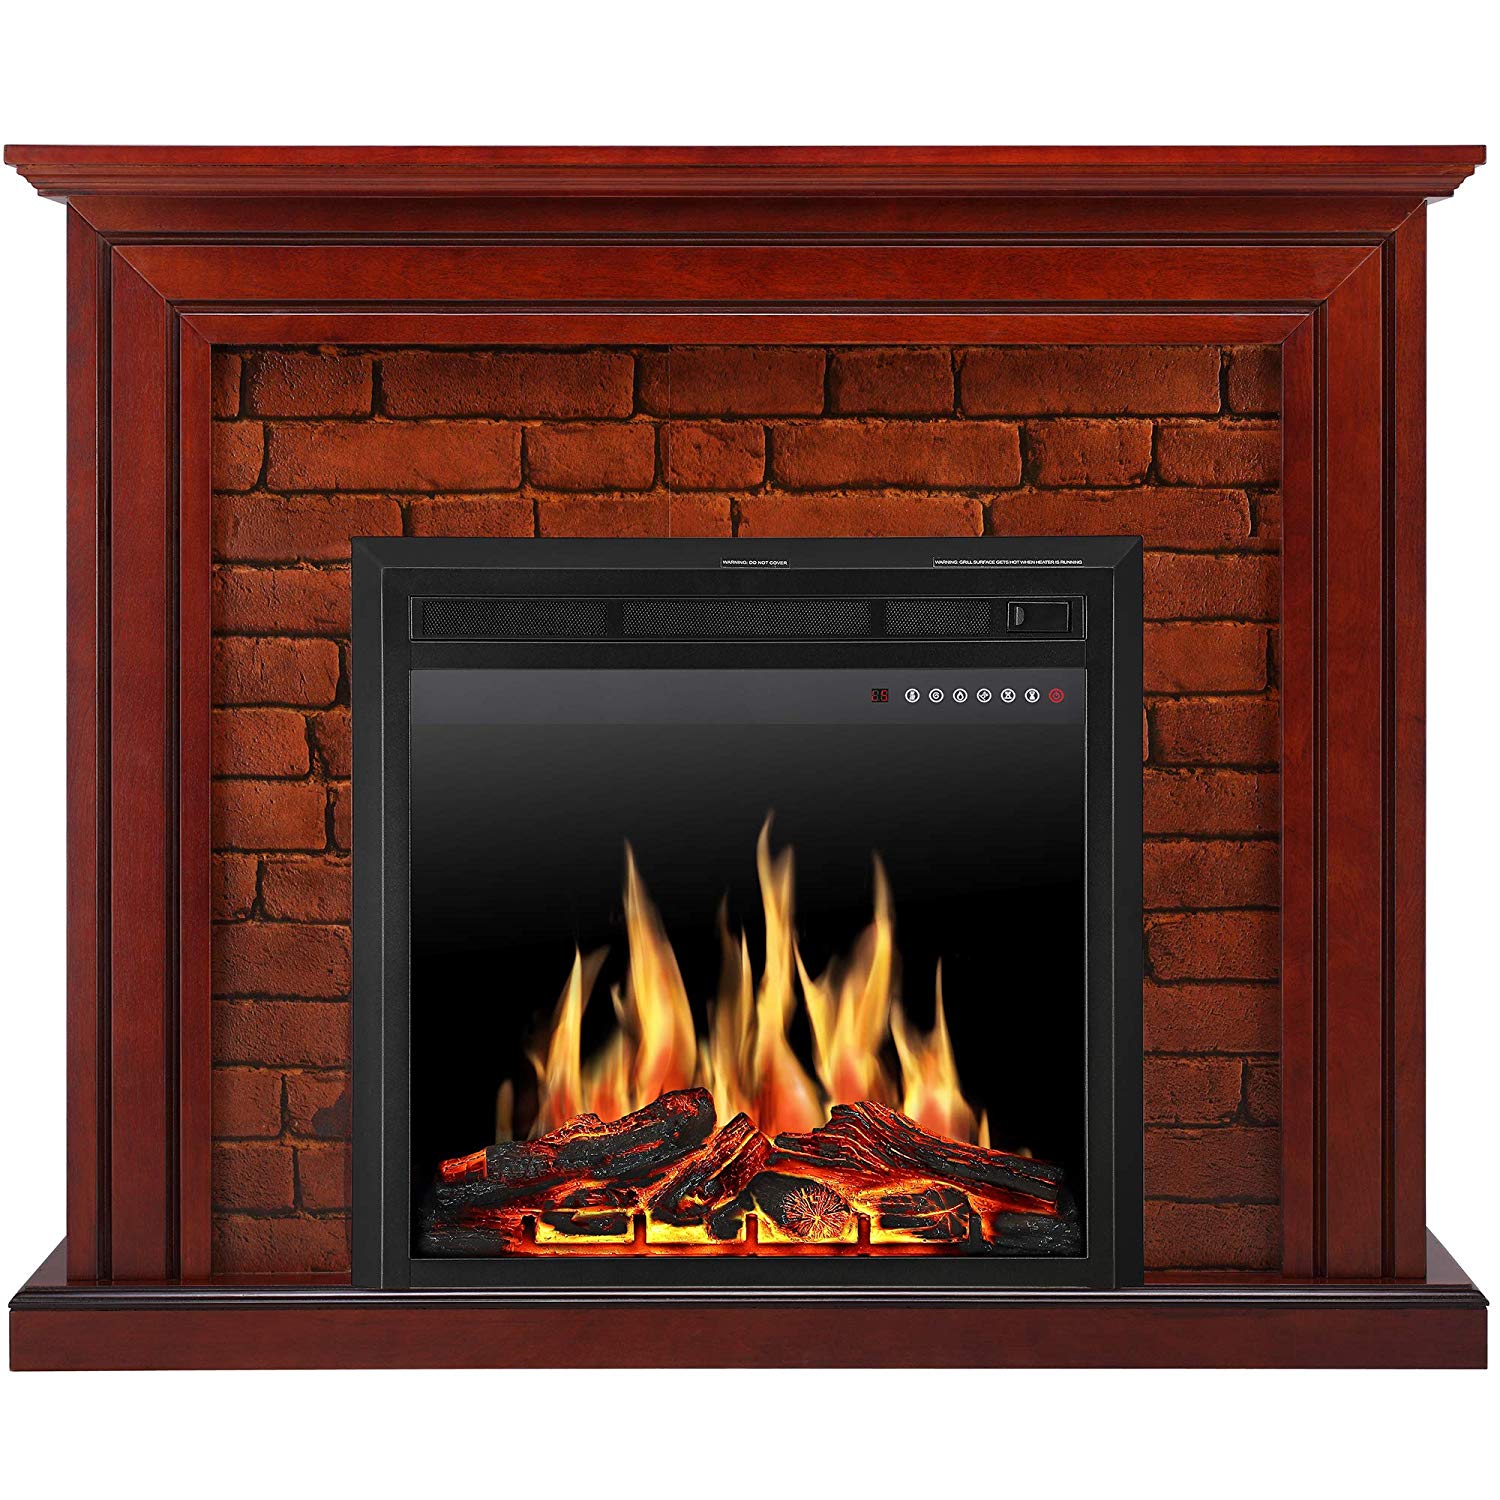 Fake Fireplace Logs Electric Inspirational Jamfly Electric Fireplace Mantel Package Traditional Brick Wall Design Heater with Remote Control and Led touch Screen Home Accent Furnishings